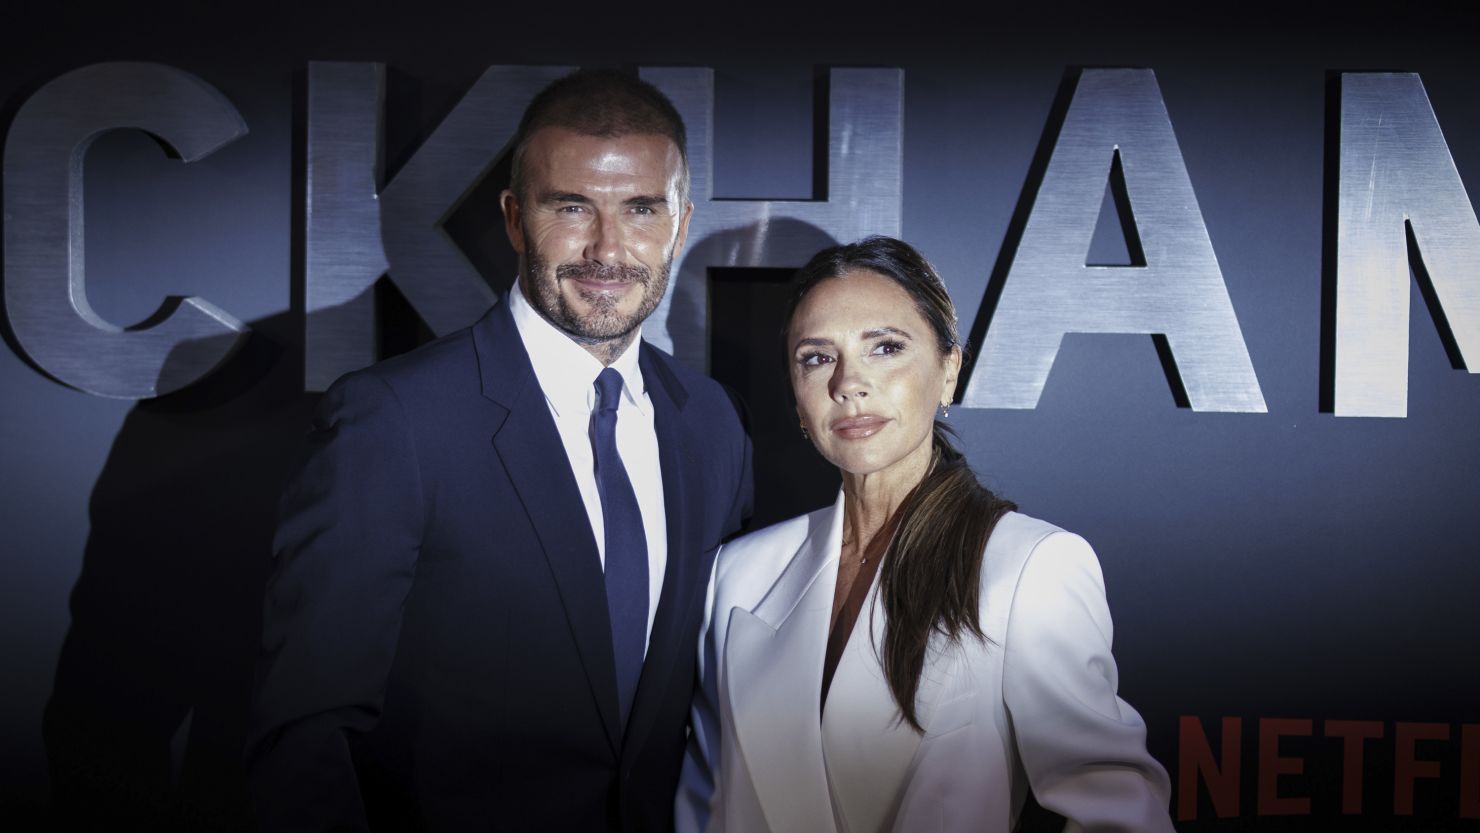 David and Victoria Beckham attend the premiere of the documentary.